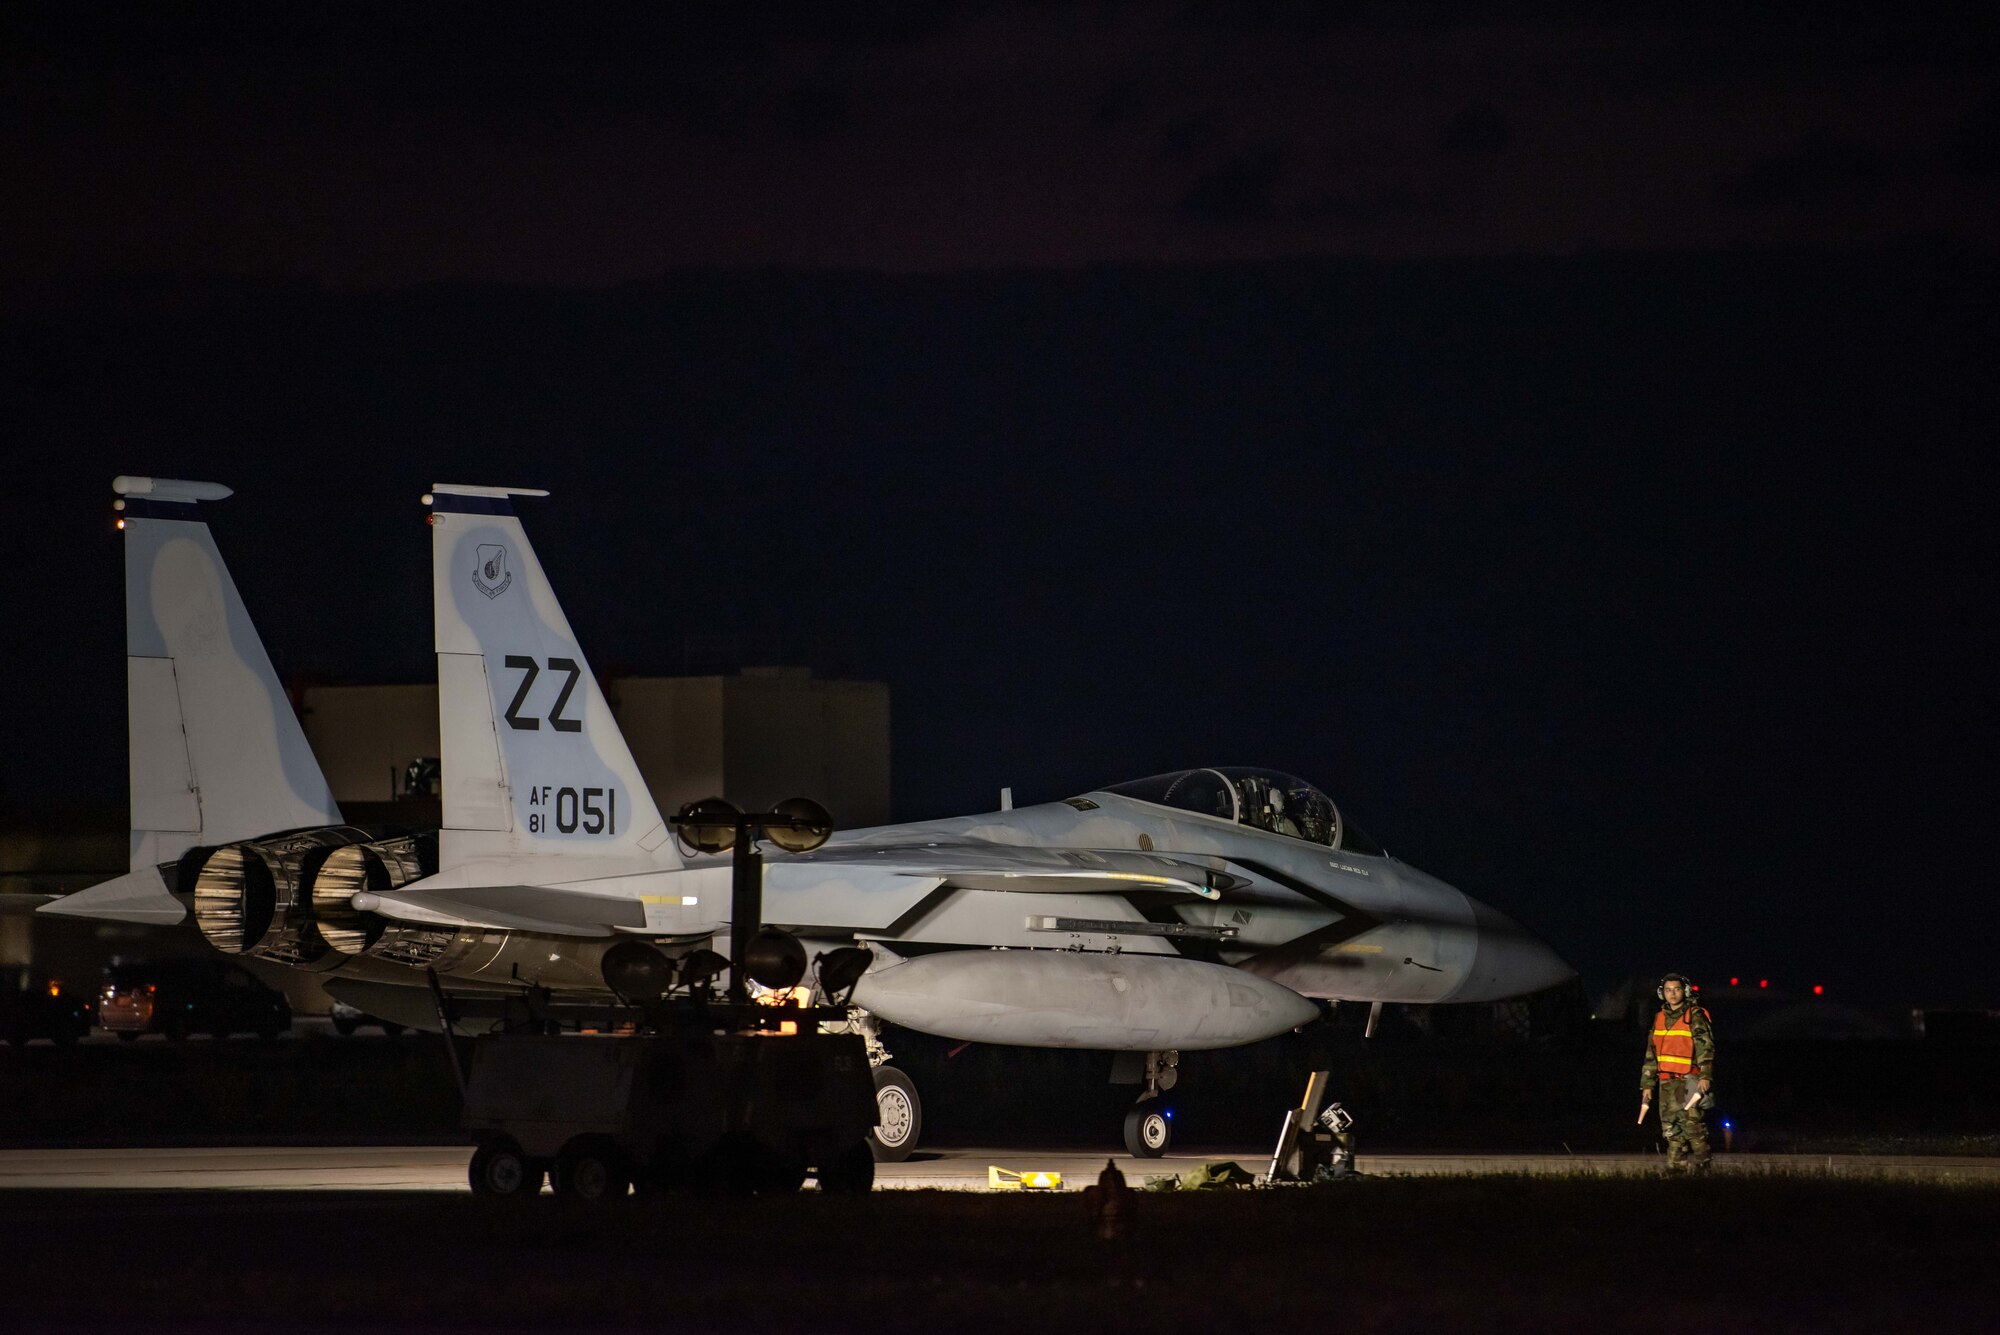 An F-15C Eagle taxi's on a flightline before takeoff at sunset.